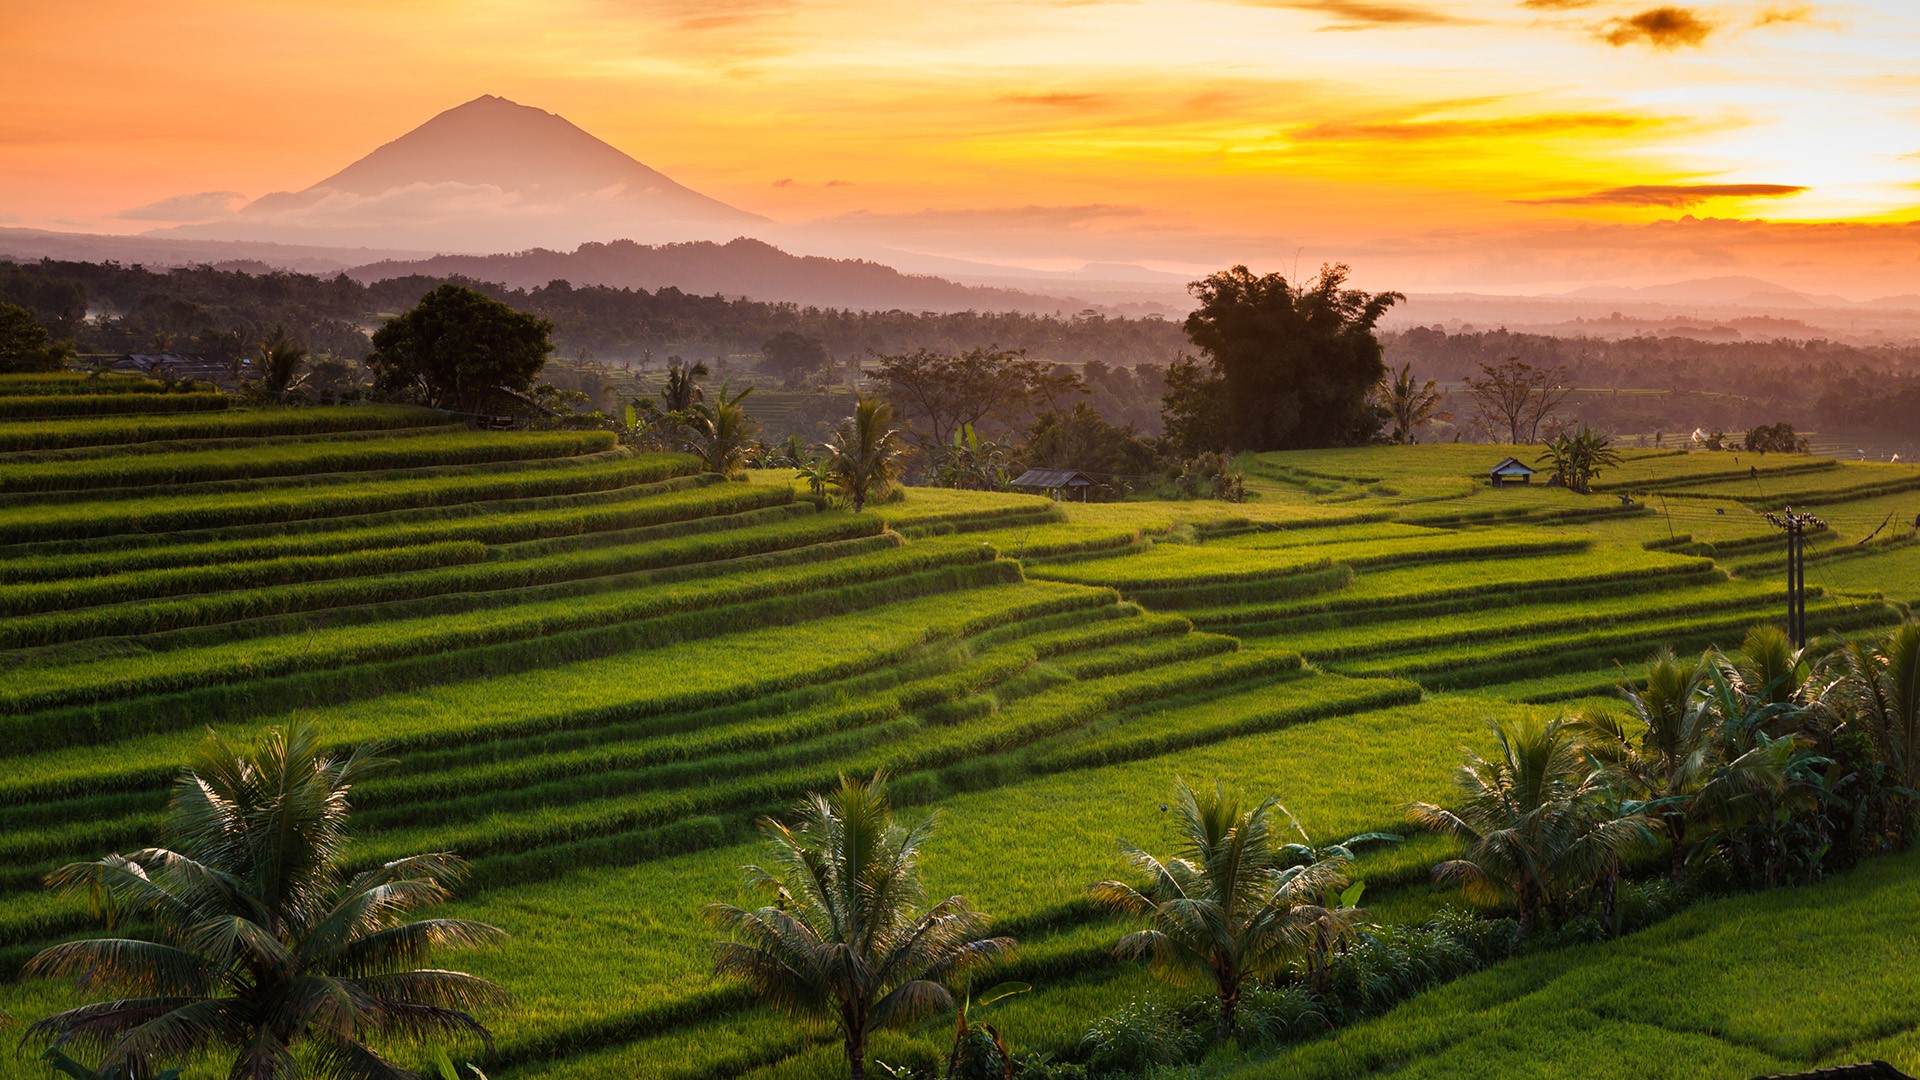 Nature Landscape Mountains Trees Field Sky Sunset Clouds Far View Rice Terrace Bali Indonesia 1920x1080